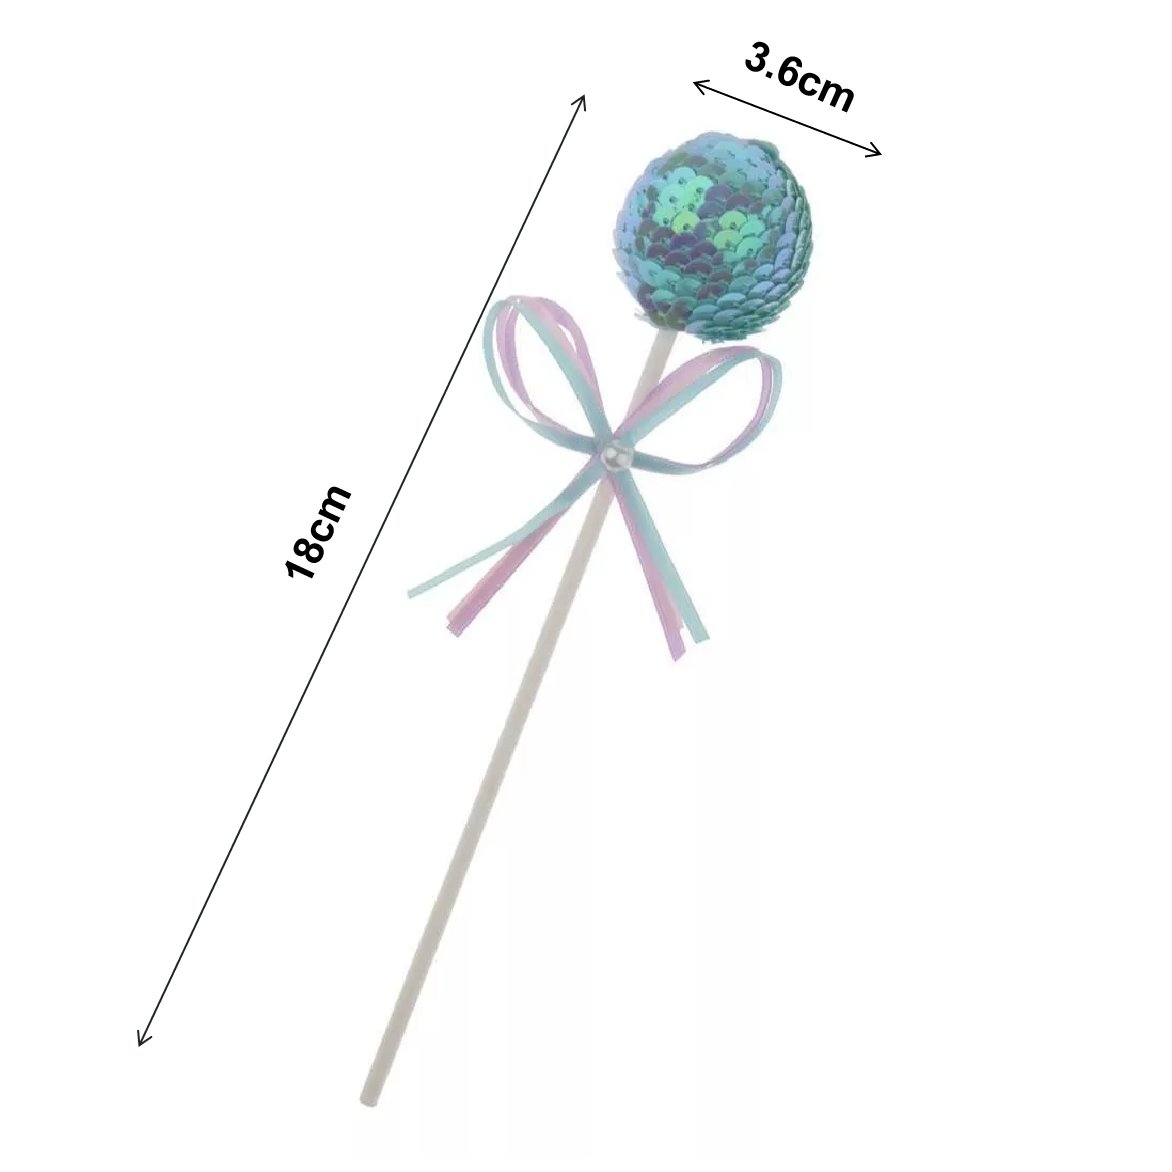 Cake Topper Cupcake Decorations- Sequin Ball - blue - Rampant Coffee Company